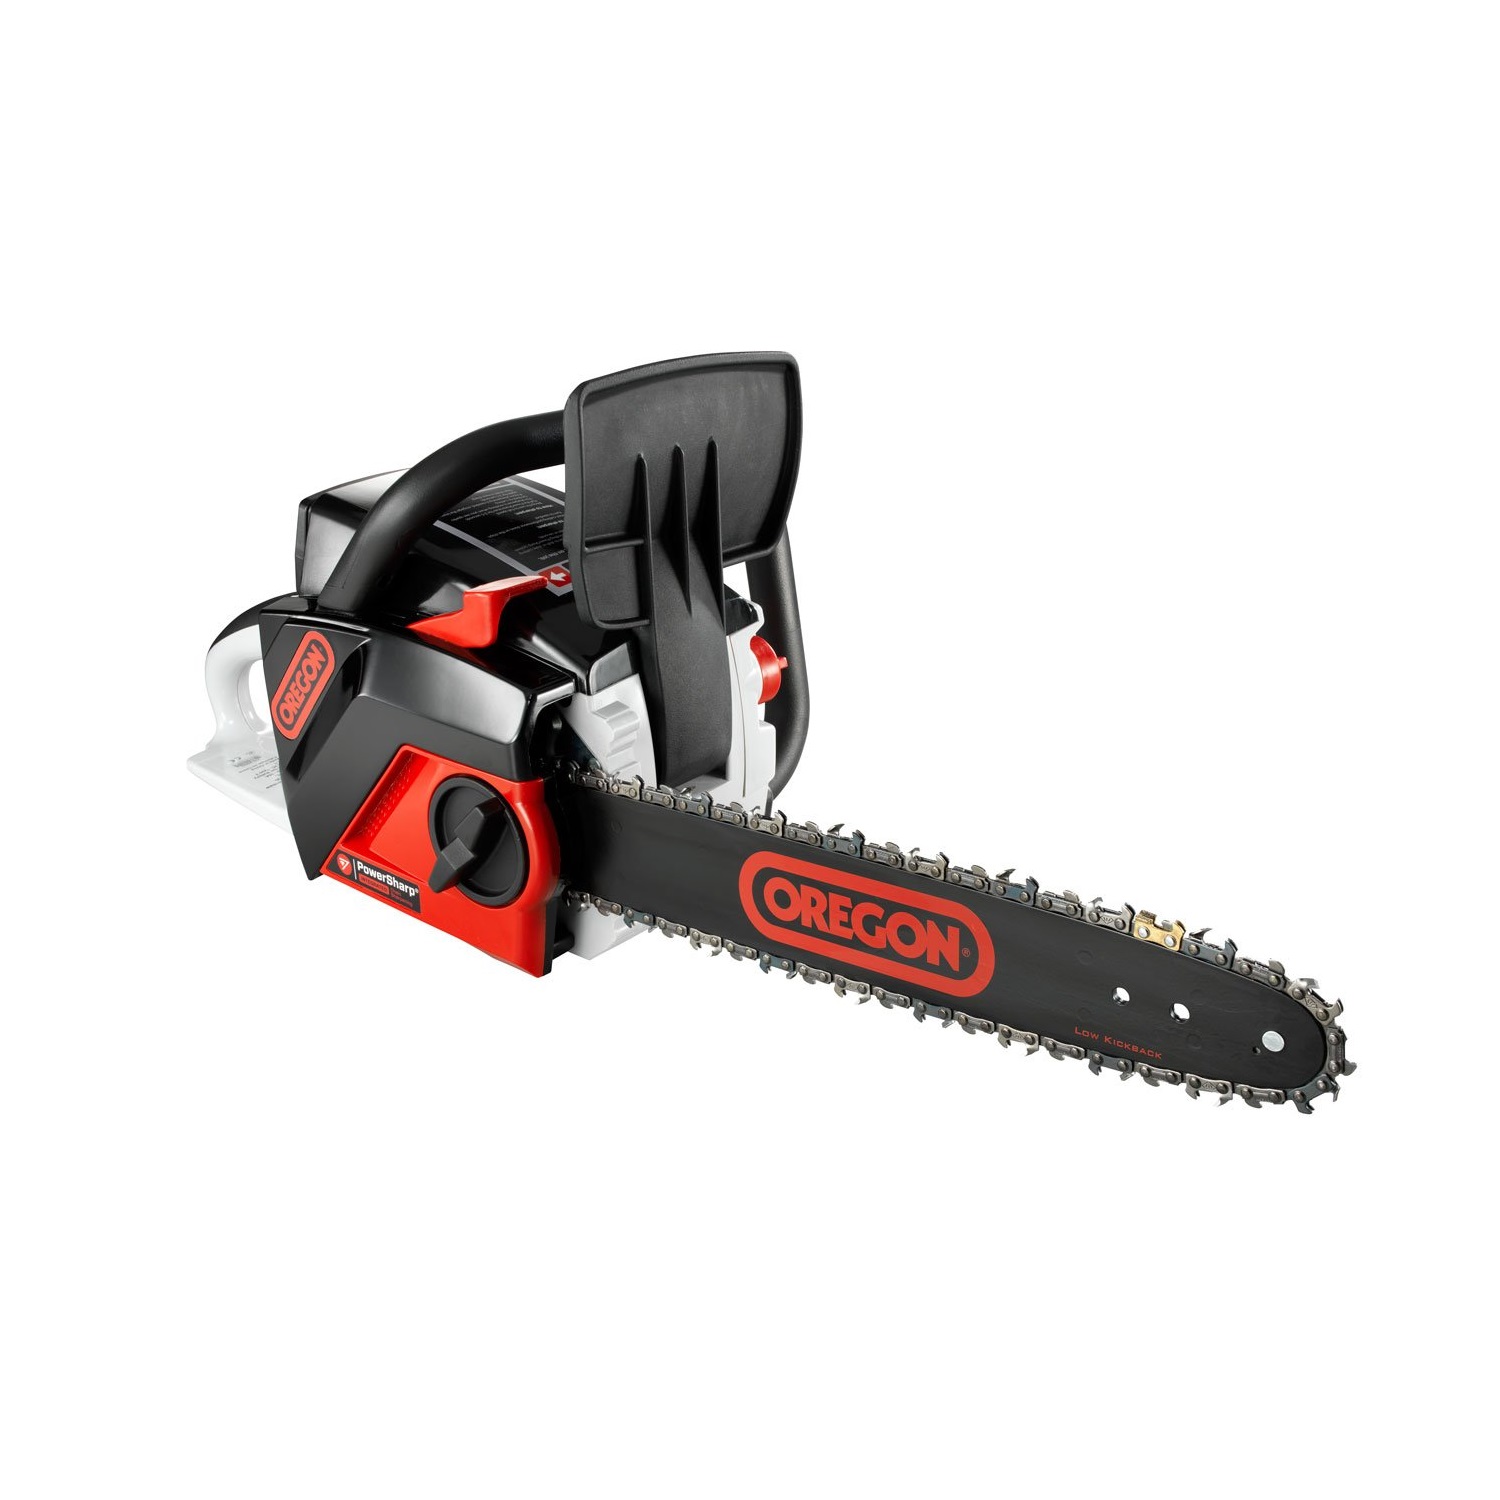 product picture of a red saw